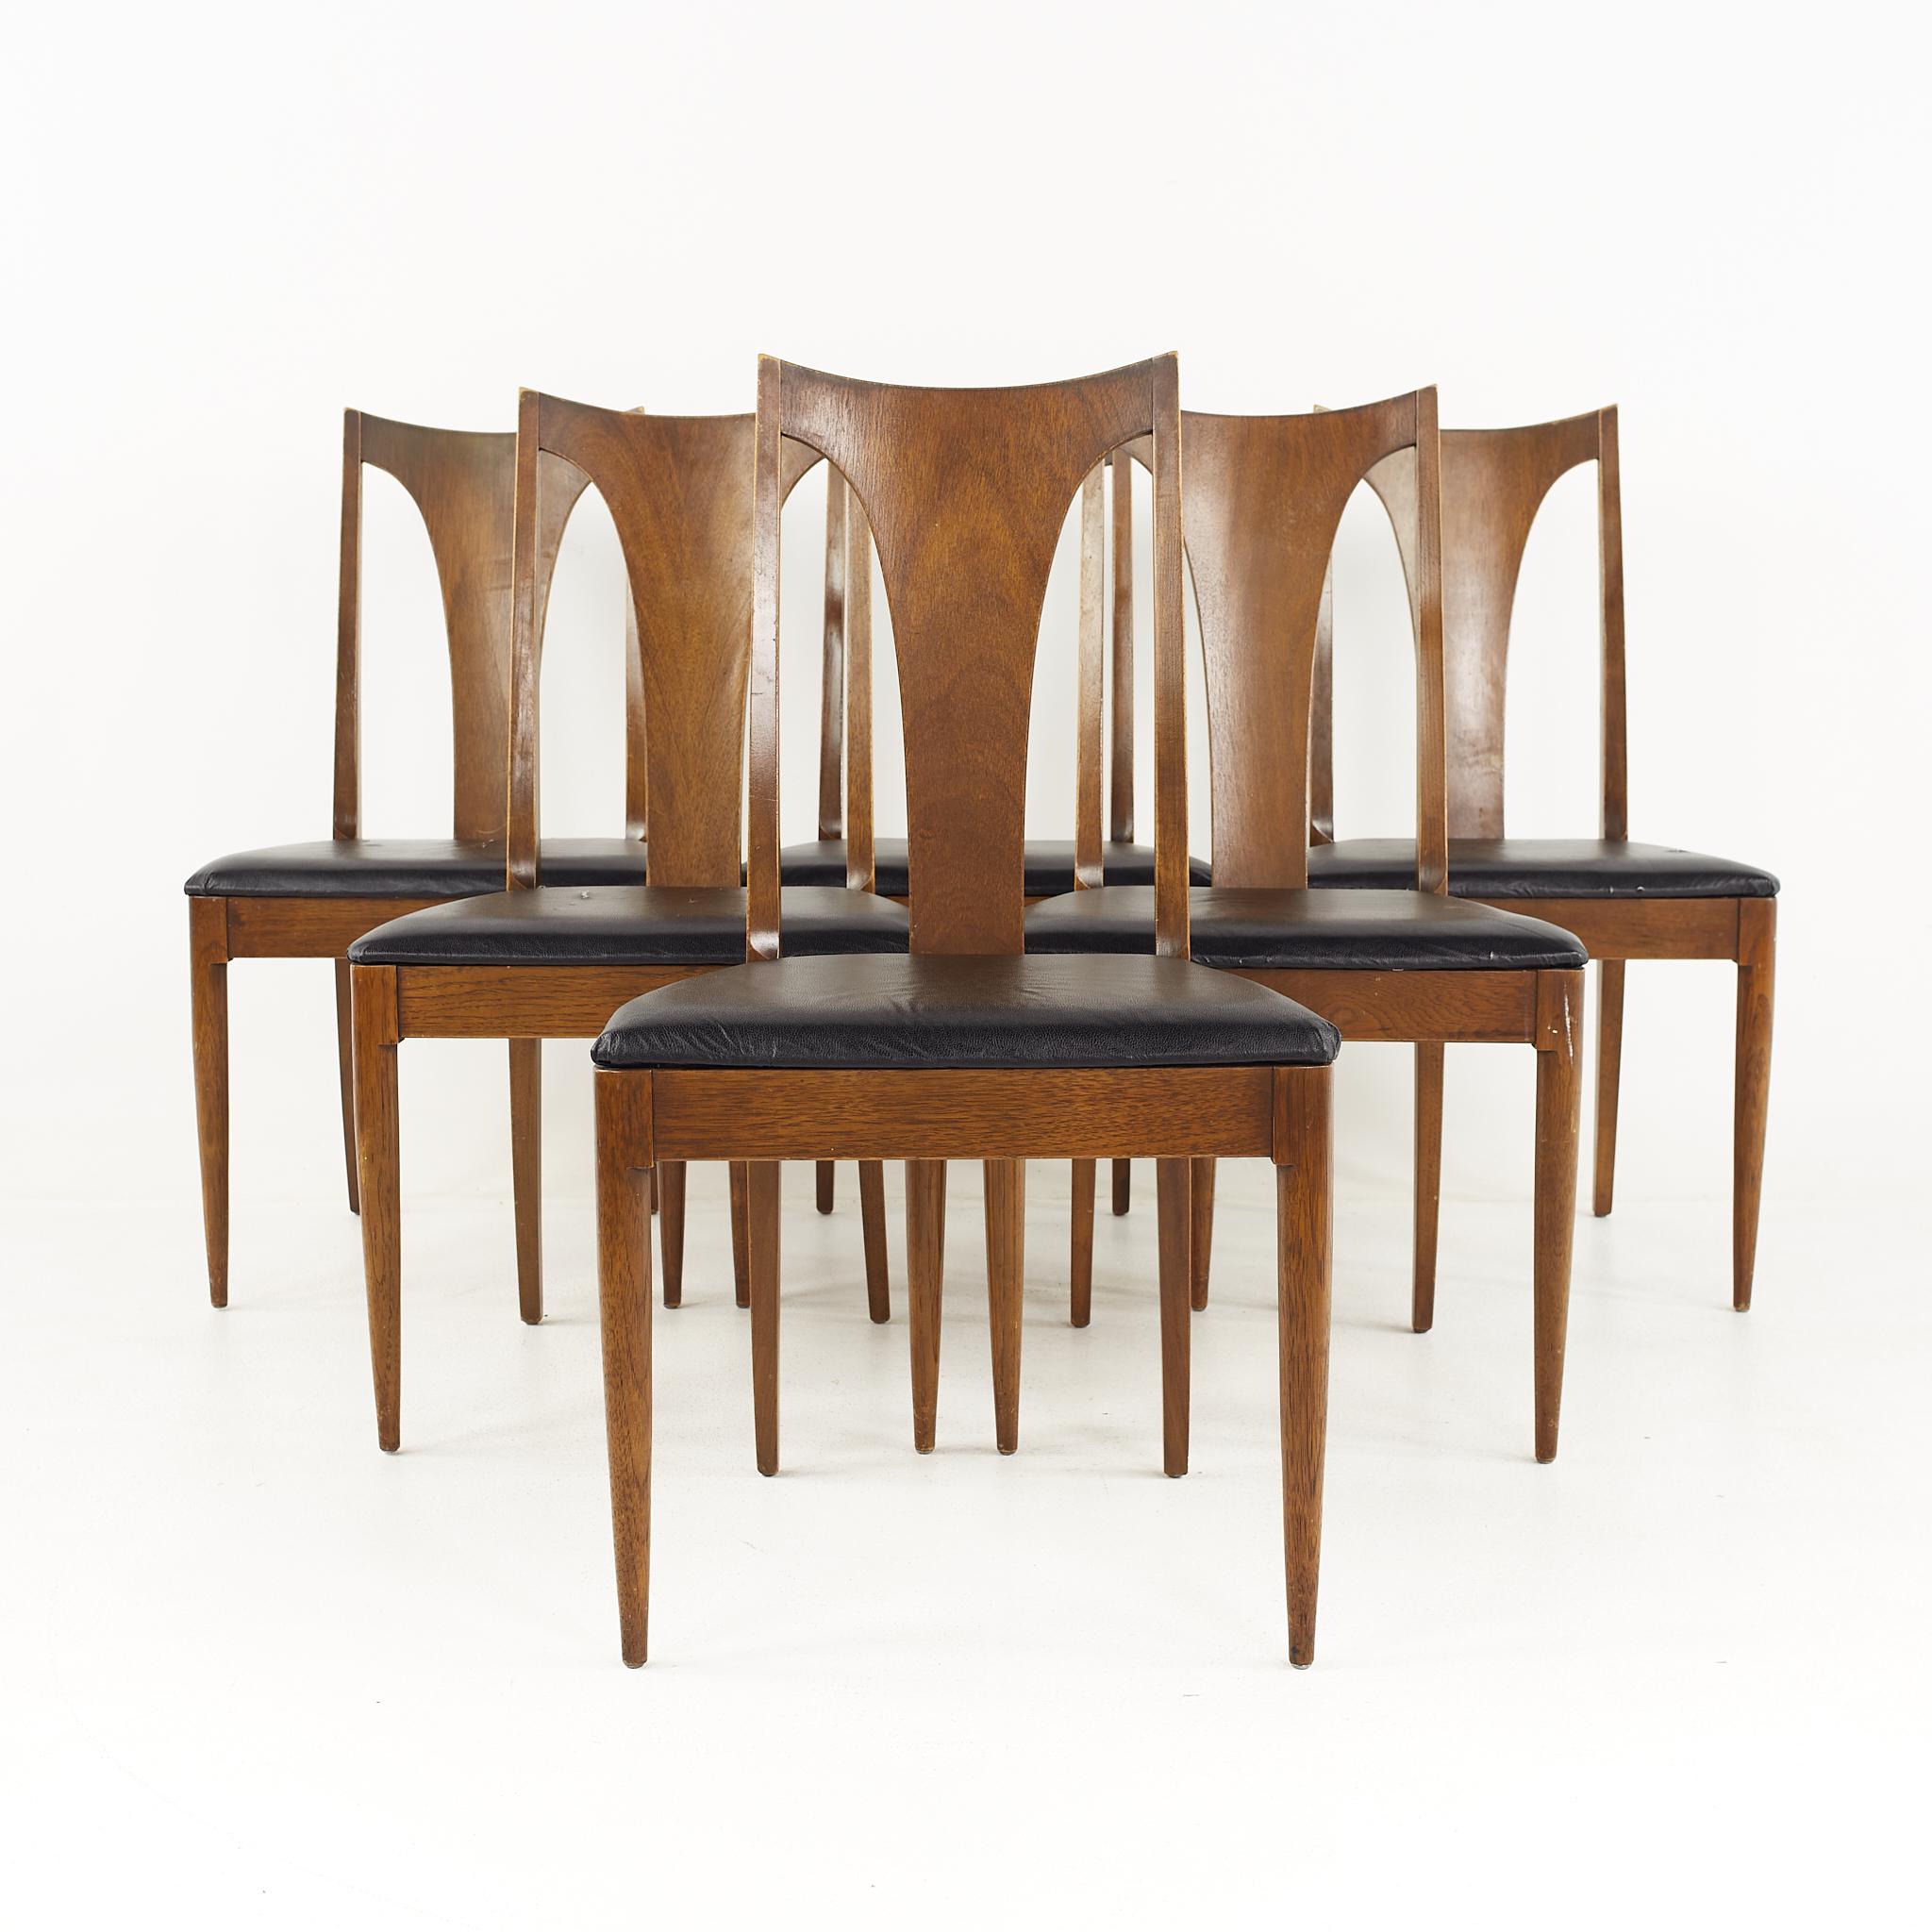 Broyhill Brasilia II mid century dining chairs - set of 6

Each chair measures: 20.5 wide x 20 deep x 37 inches high

All pieces of furniture can be had in what we call restored vintage condition. That means the piece is restored upon purchase